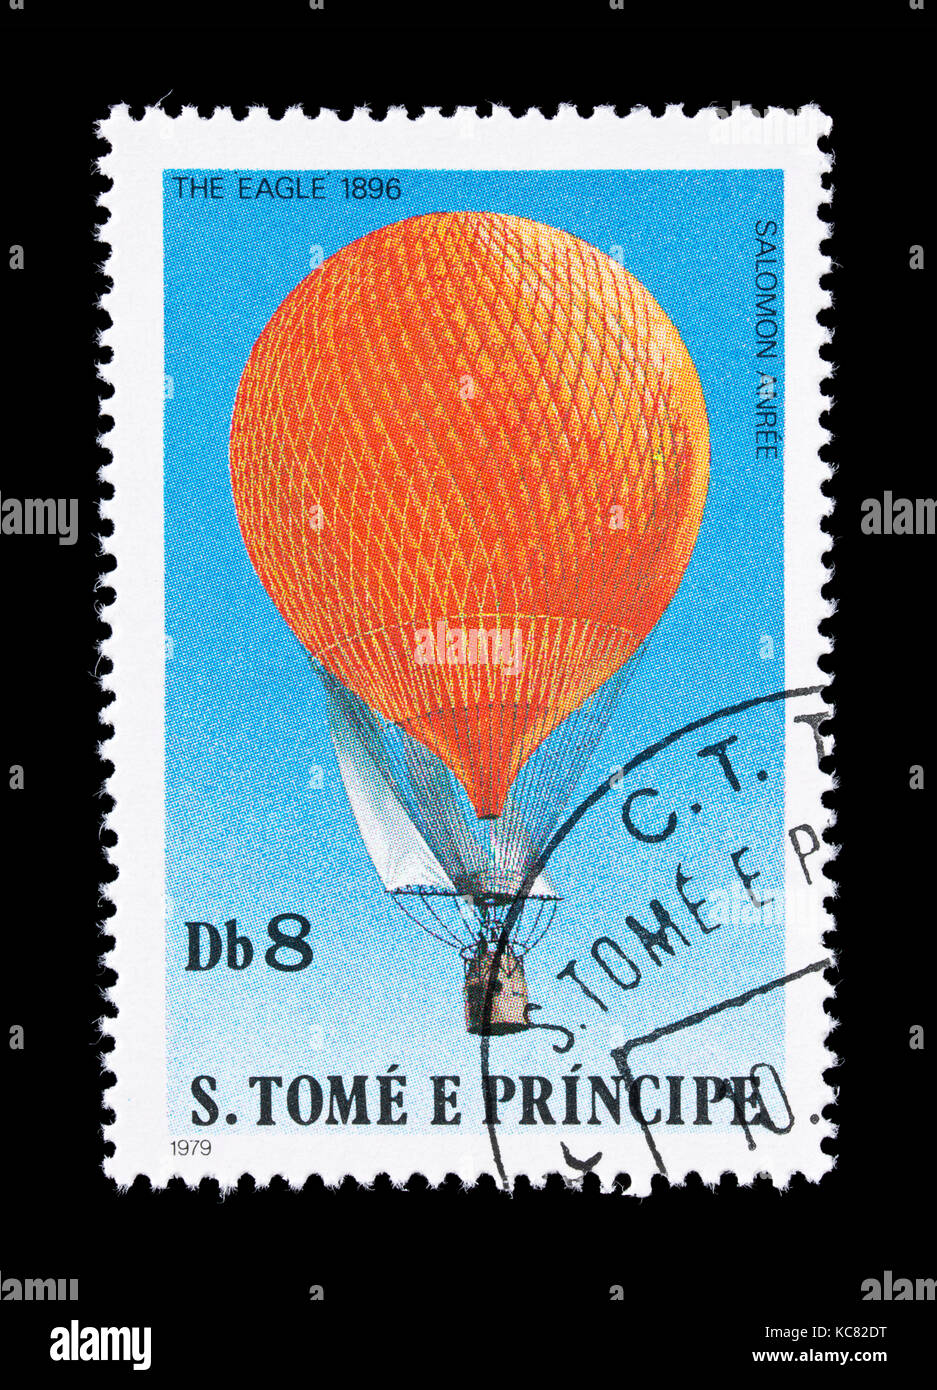 Postage stamp from the Saint Thomas and Prince Islands depicting the Salomon Anree balloon 'The Eagle', 1896. Stock Photo